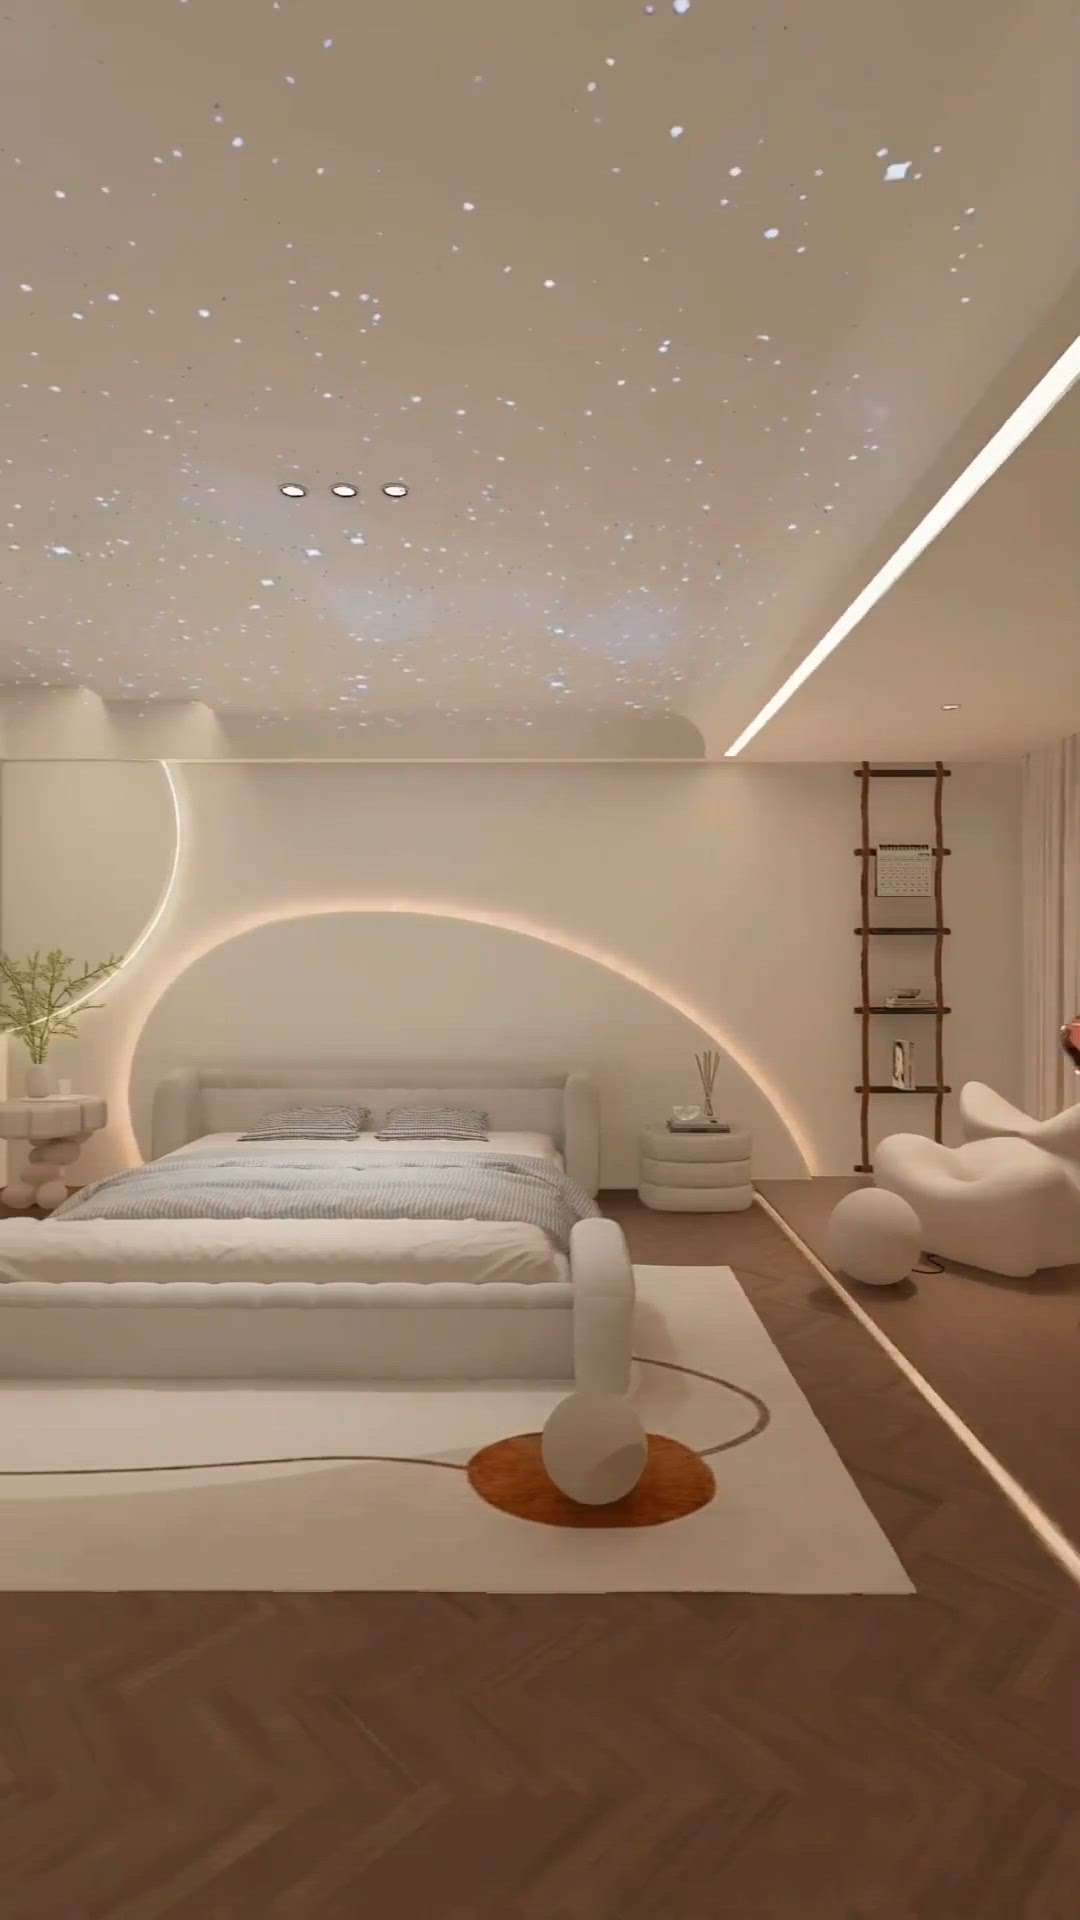 the final bed room #masterbedroom #room #spaceroom #amazing #wow #likeapro #editorchoice #contac t for DM ME #ninefoursevenfivezerosixeaghtnineomeone